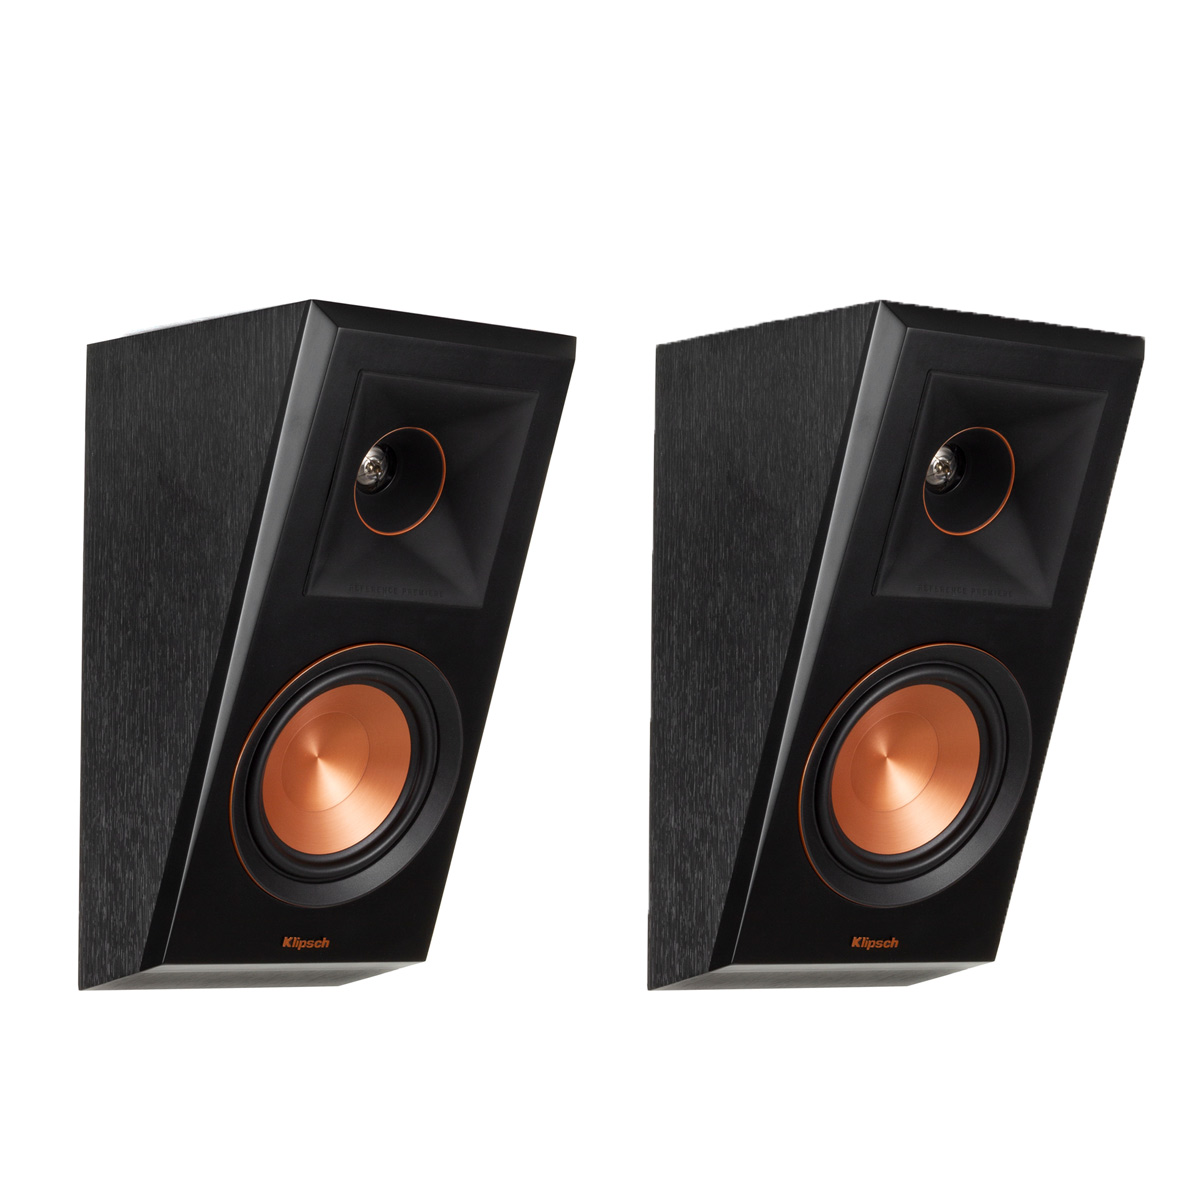 Klipsch RP-500SA Reference Premiere Dolby Atmos Speakers - Pair (Ebony) - image 4 of 7